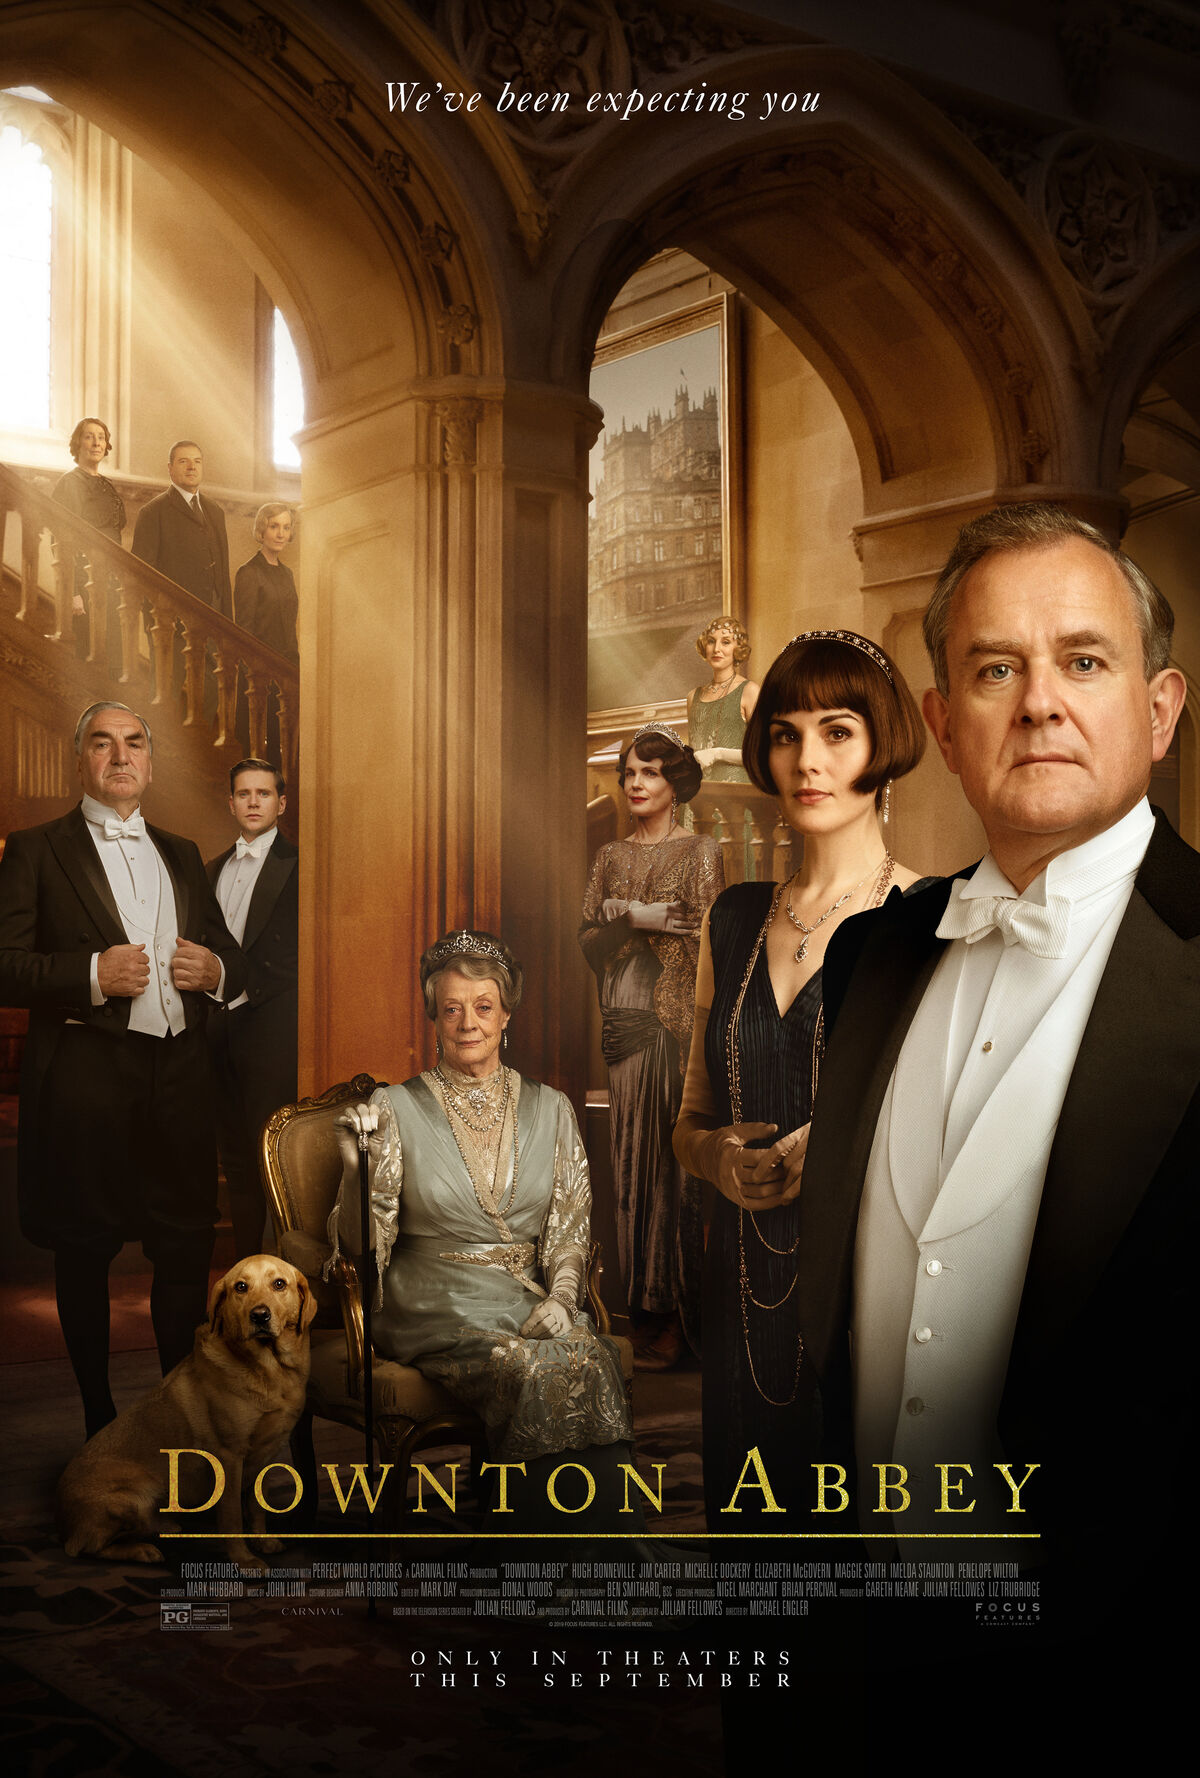 Downton Abbey (film), The JH Movie Collection's Official Wiki